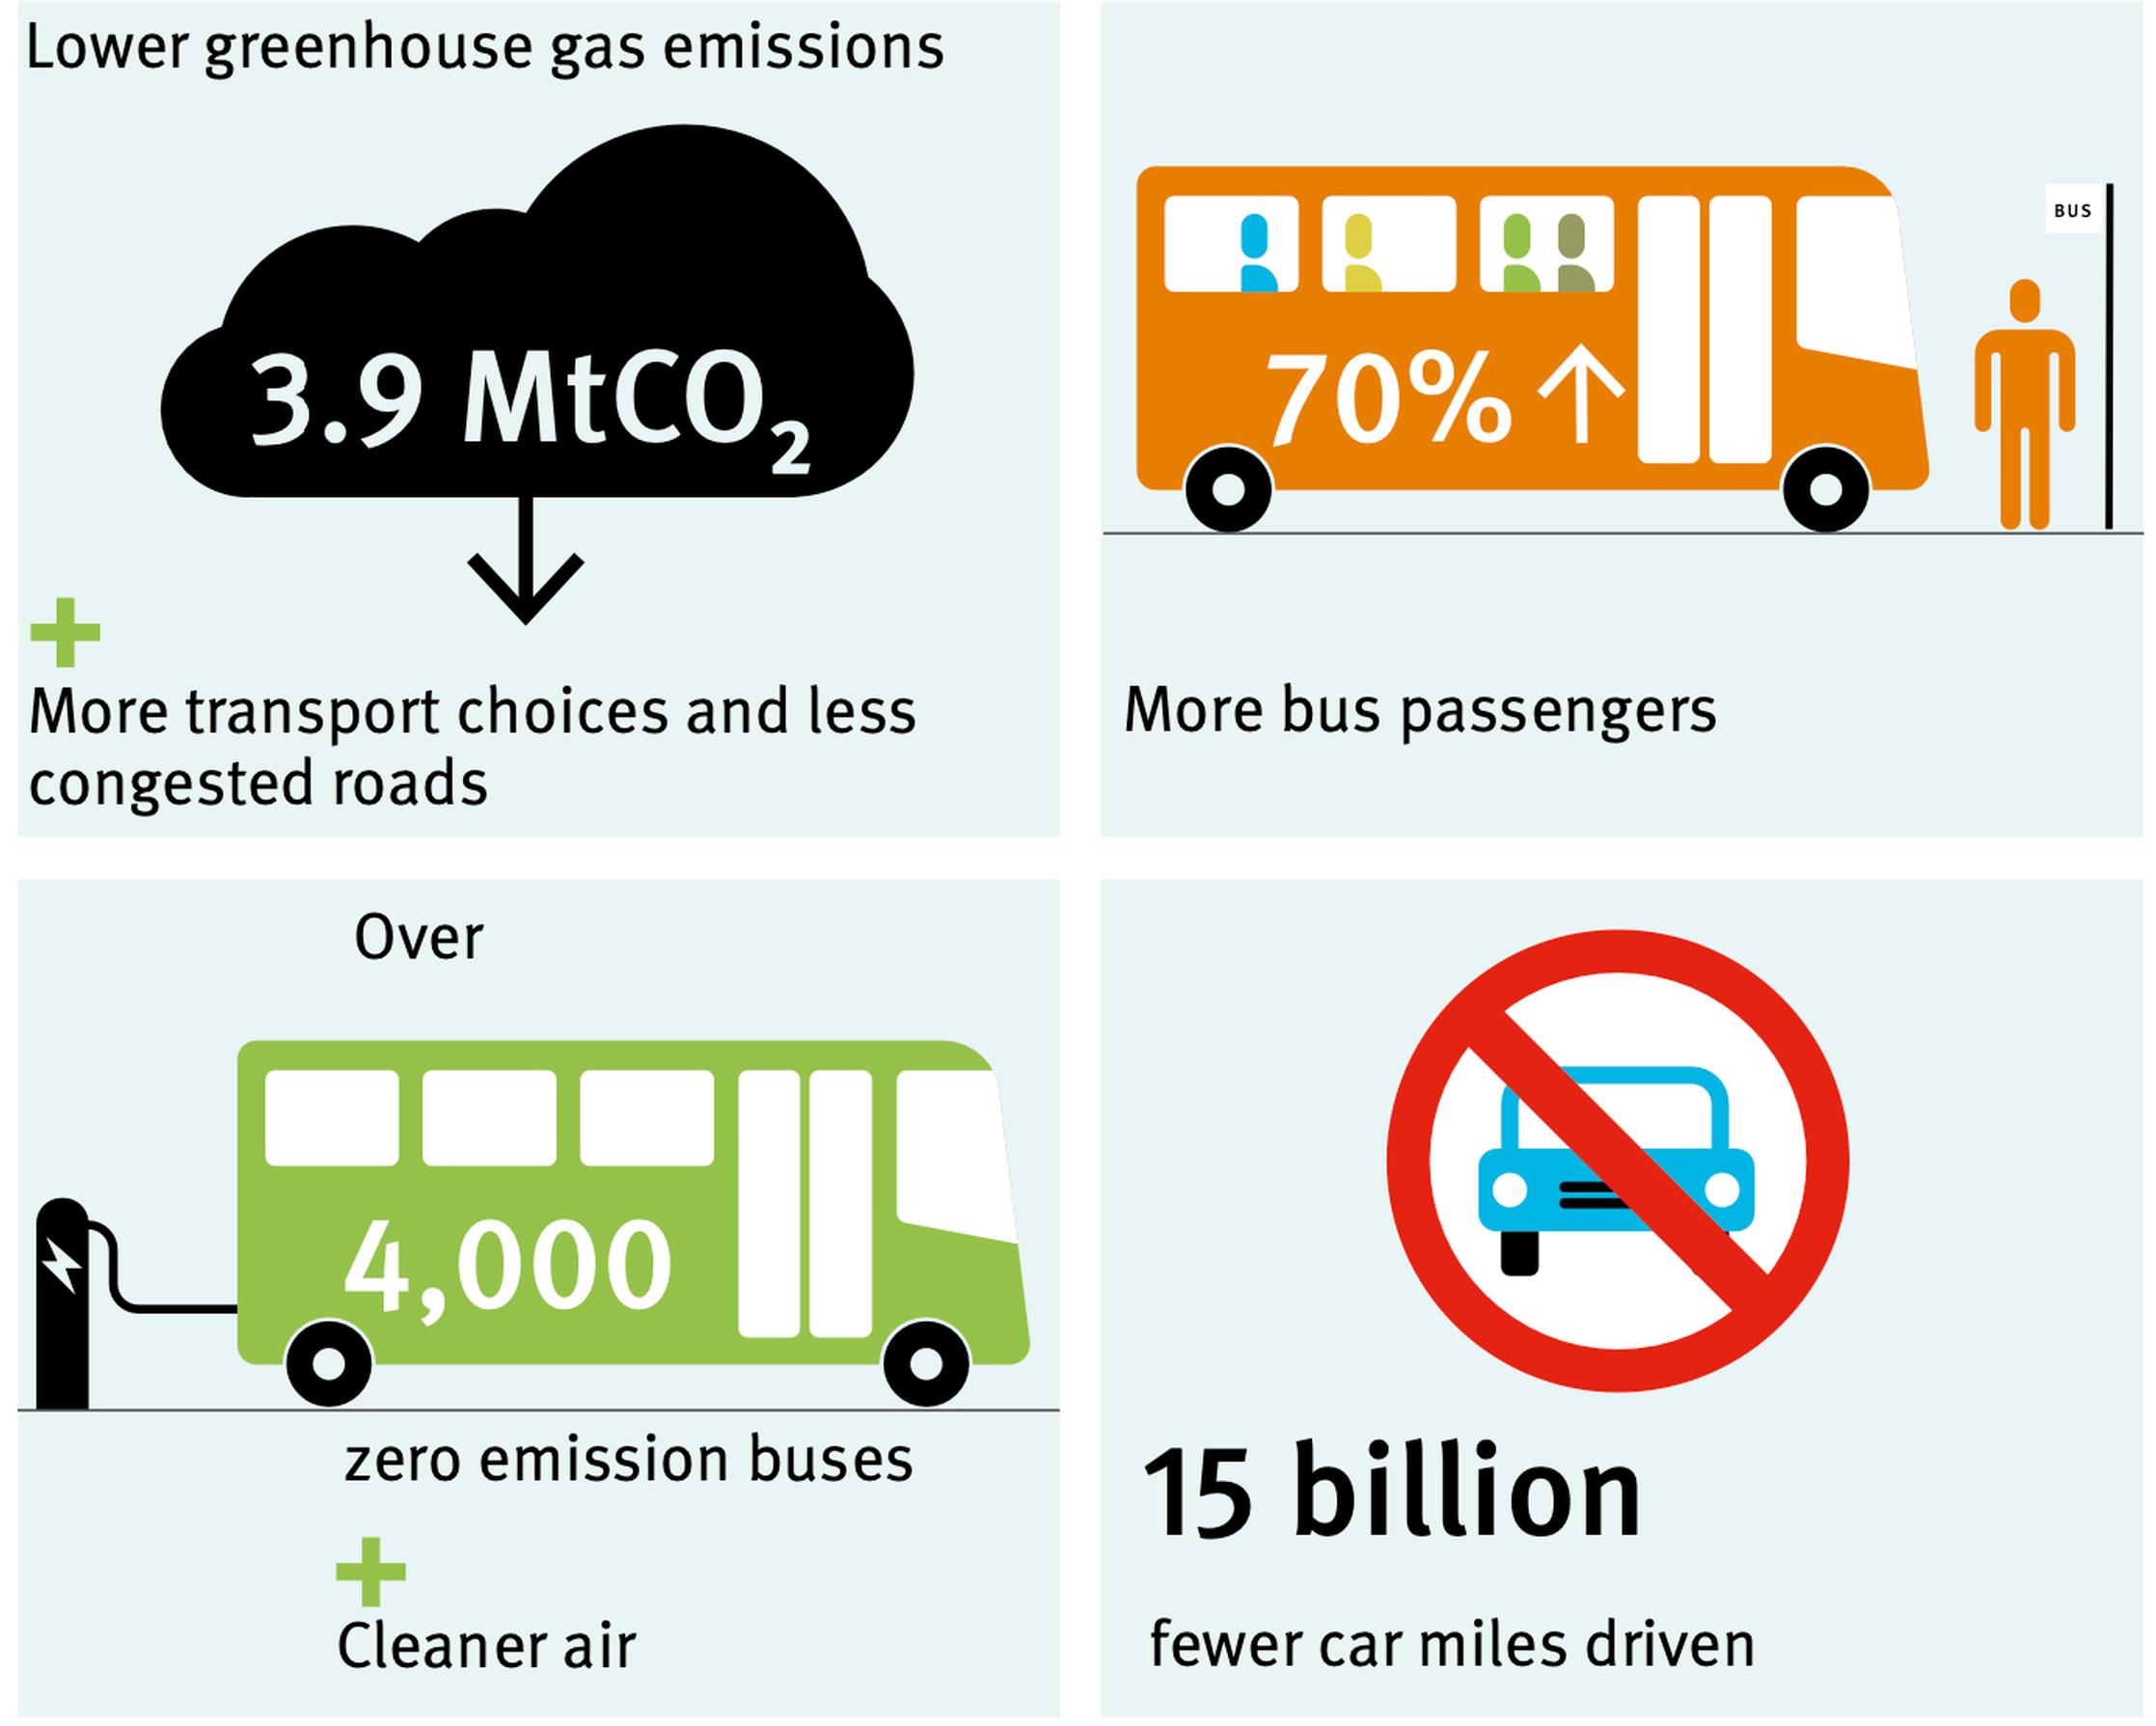 Green Alliance has calculated the benefits of its five-year bus plans